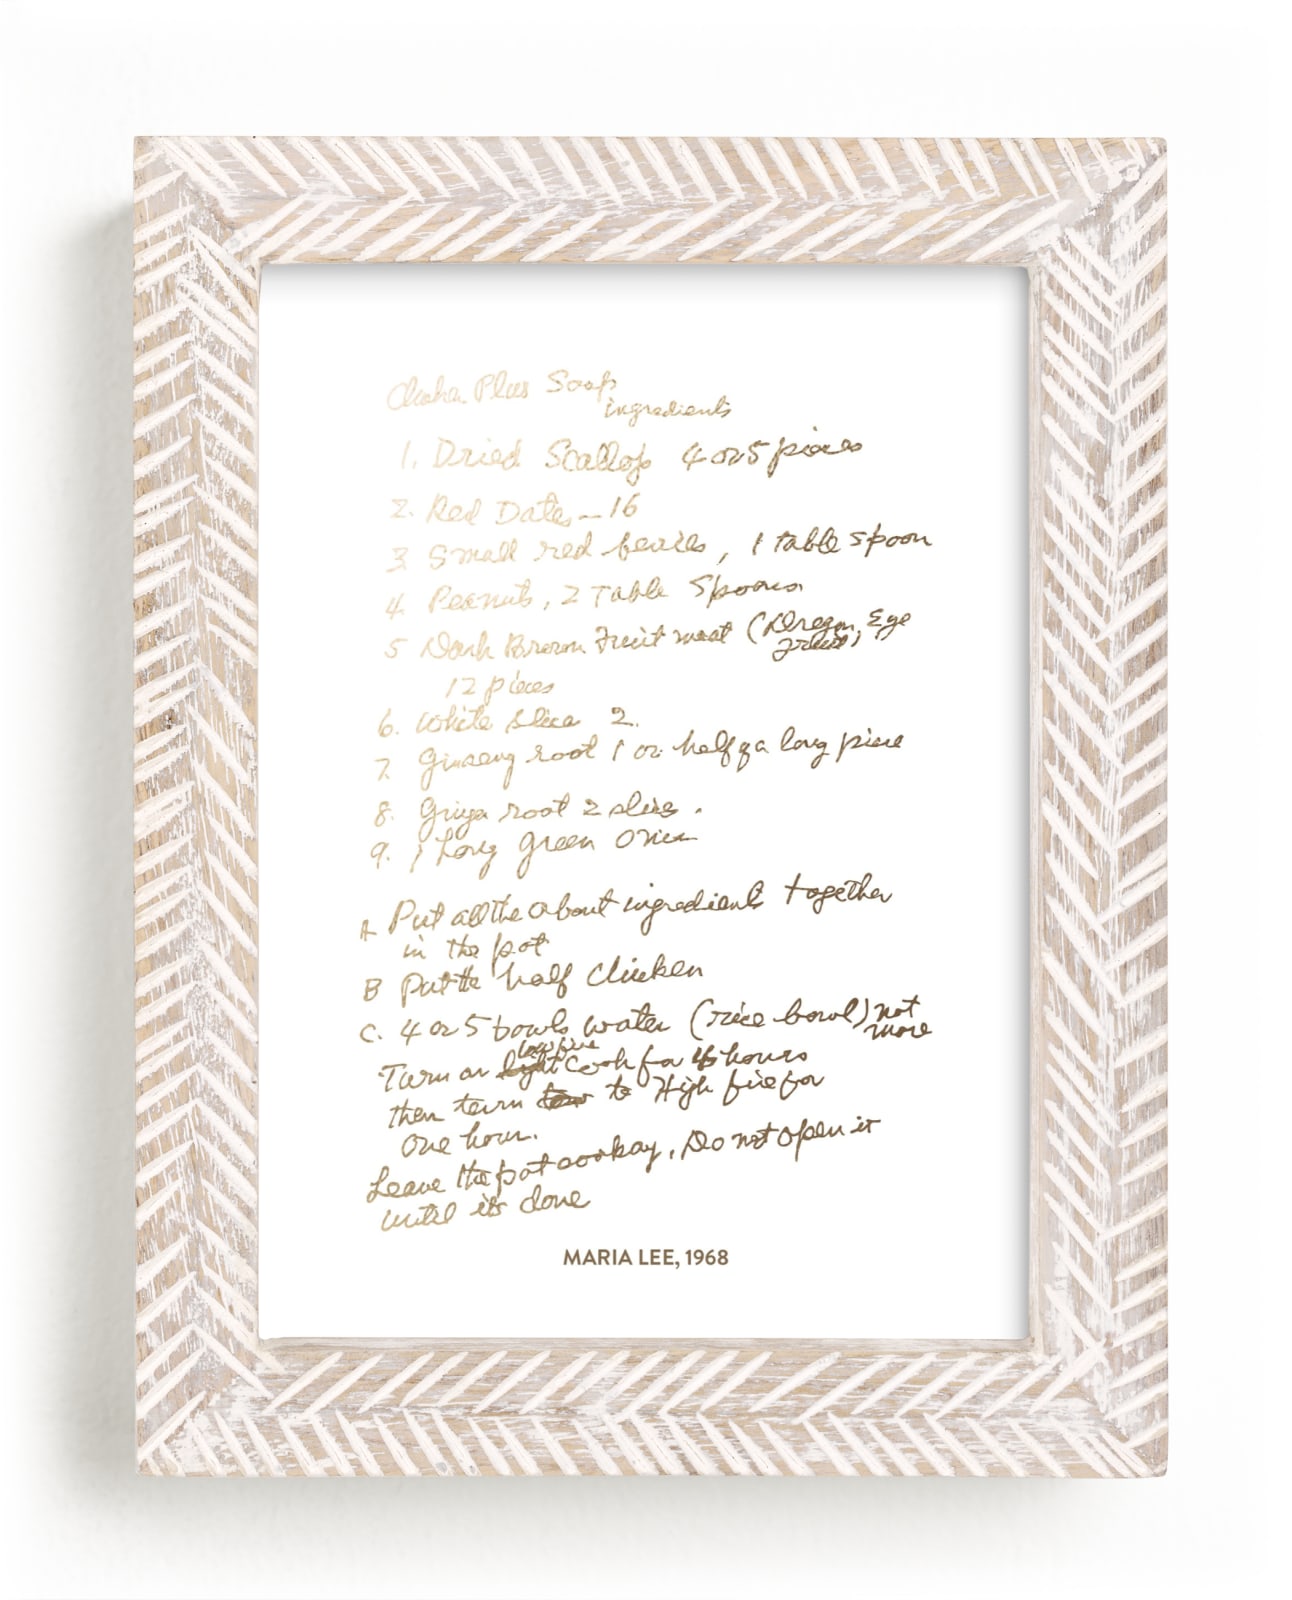 This is a gold photos to art by Minted called Your Recipe as a Foil Art Print.